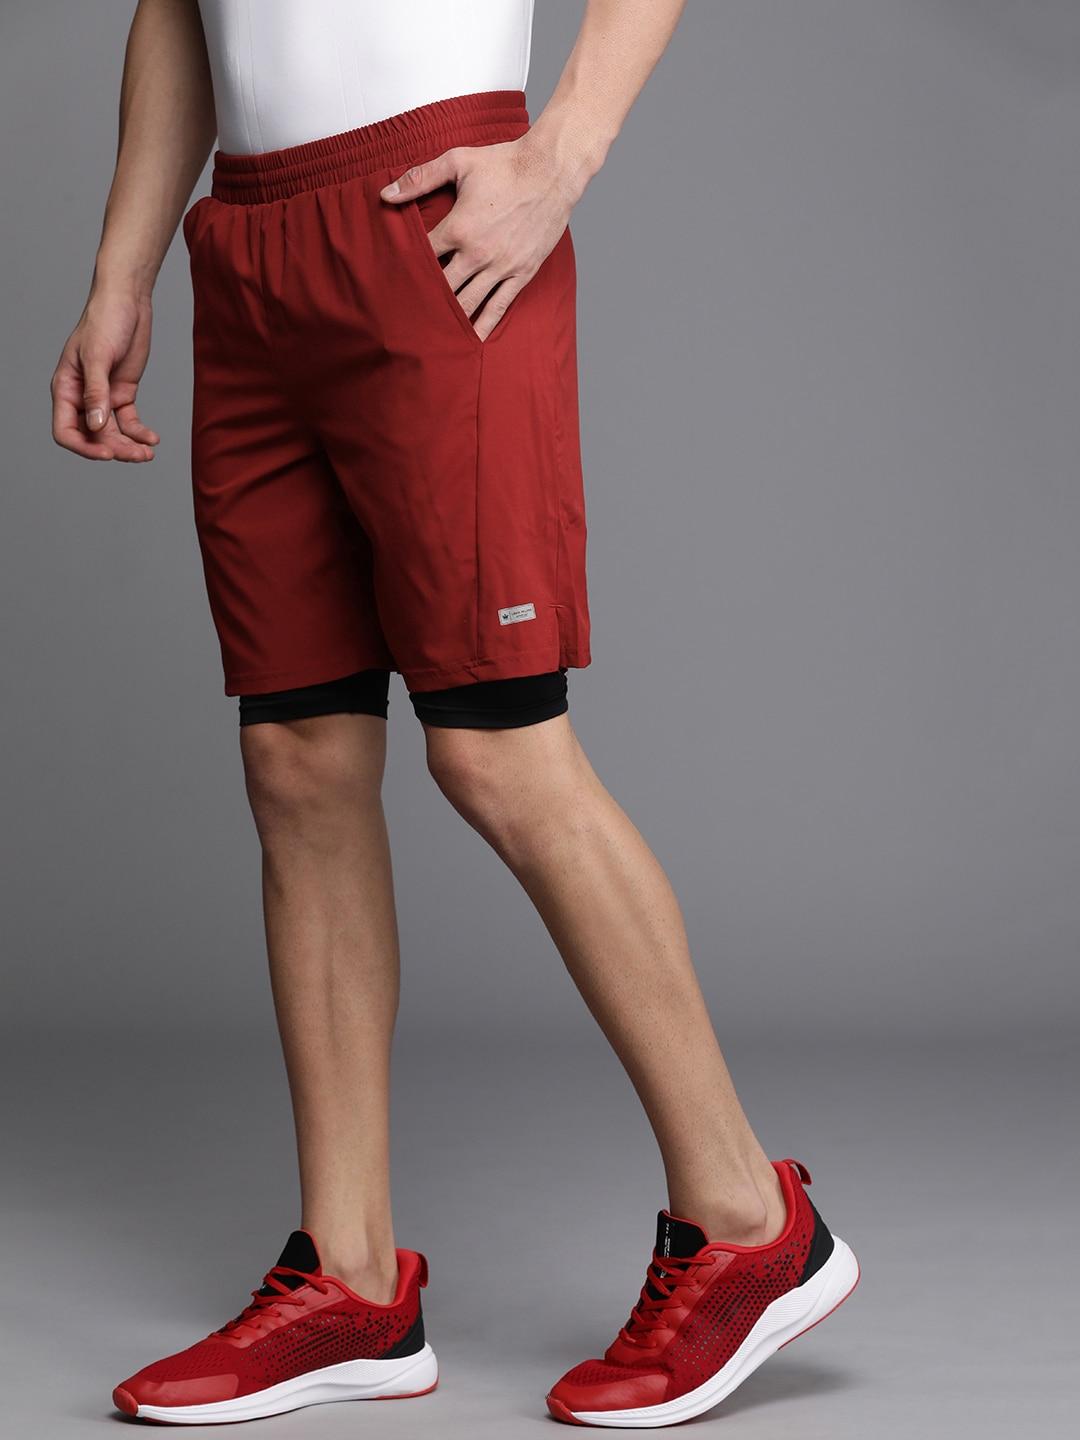 louis-philippe-athplay-men-slim-fit-training-shorts